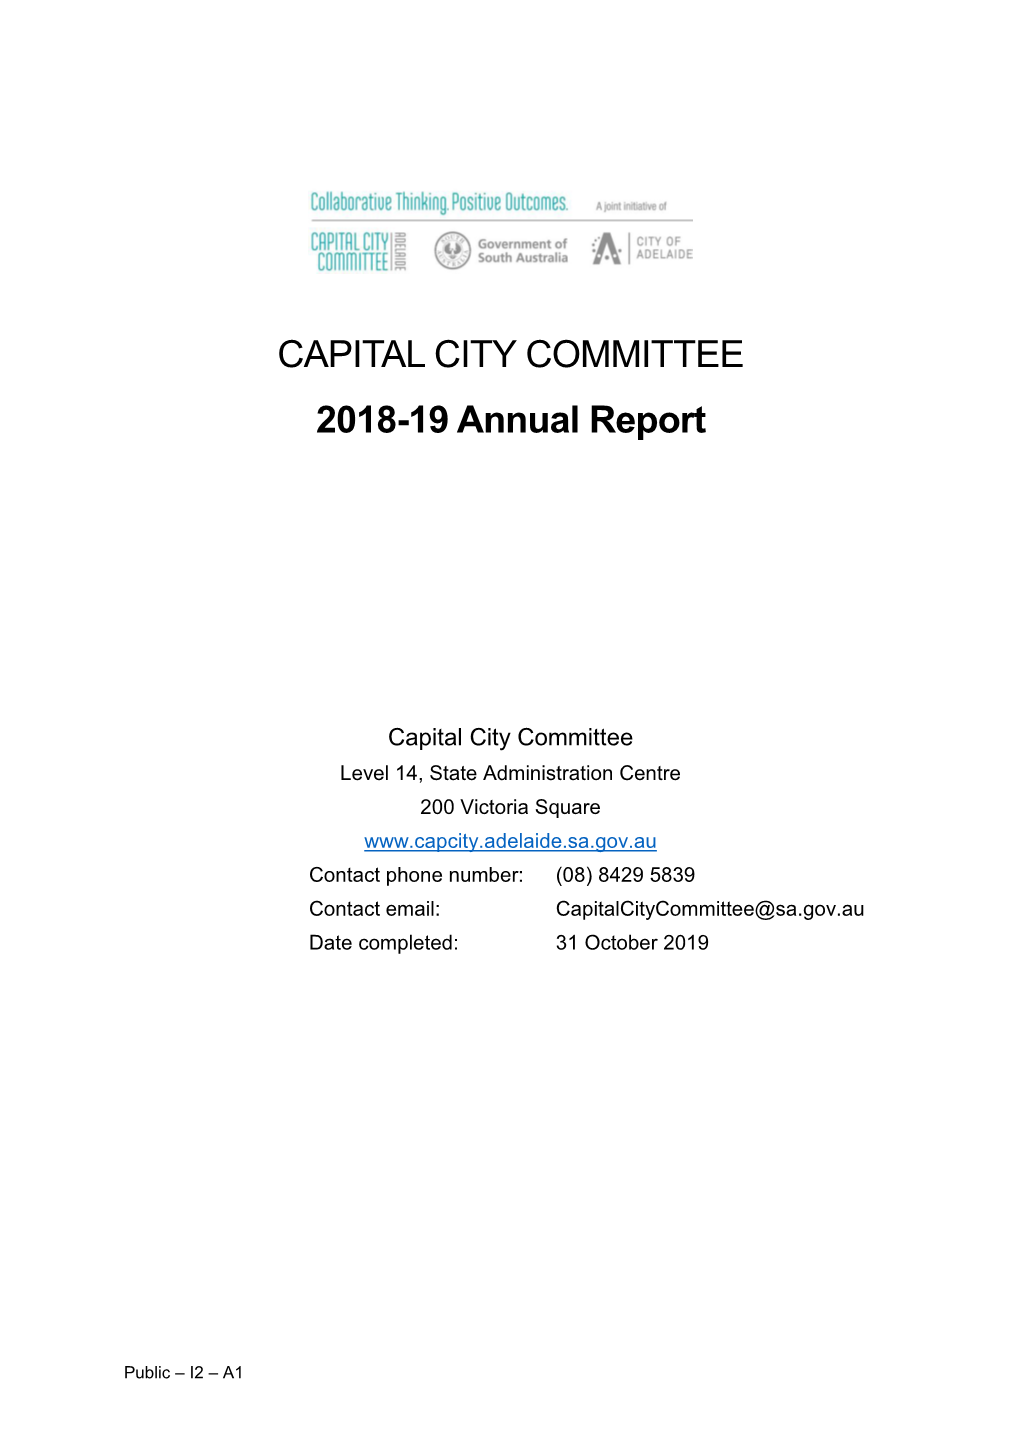 CAPITAL CITY COMMITTEE 2018-19 Annual Report